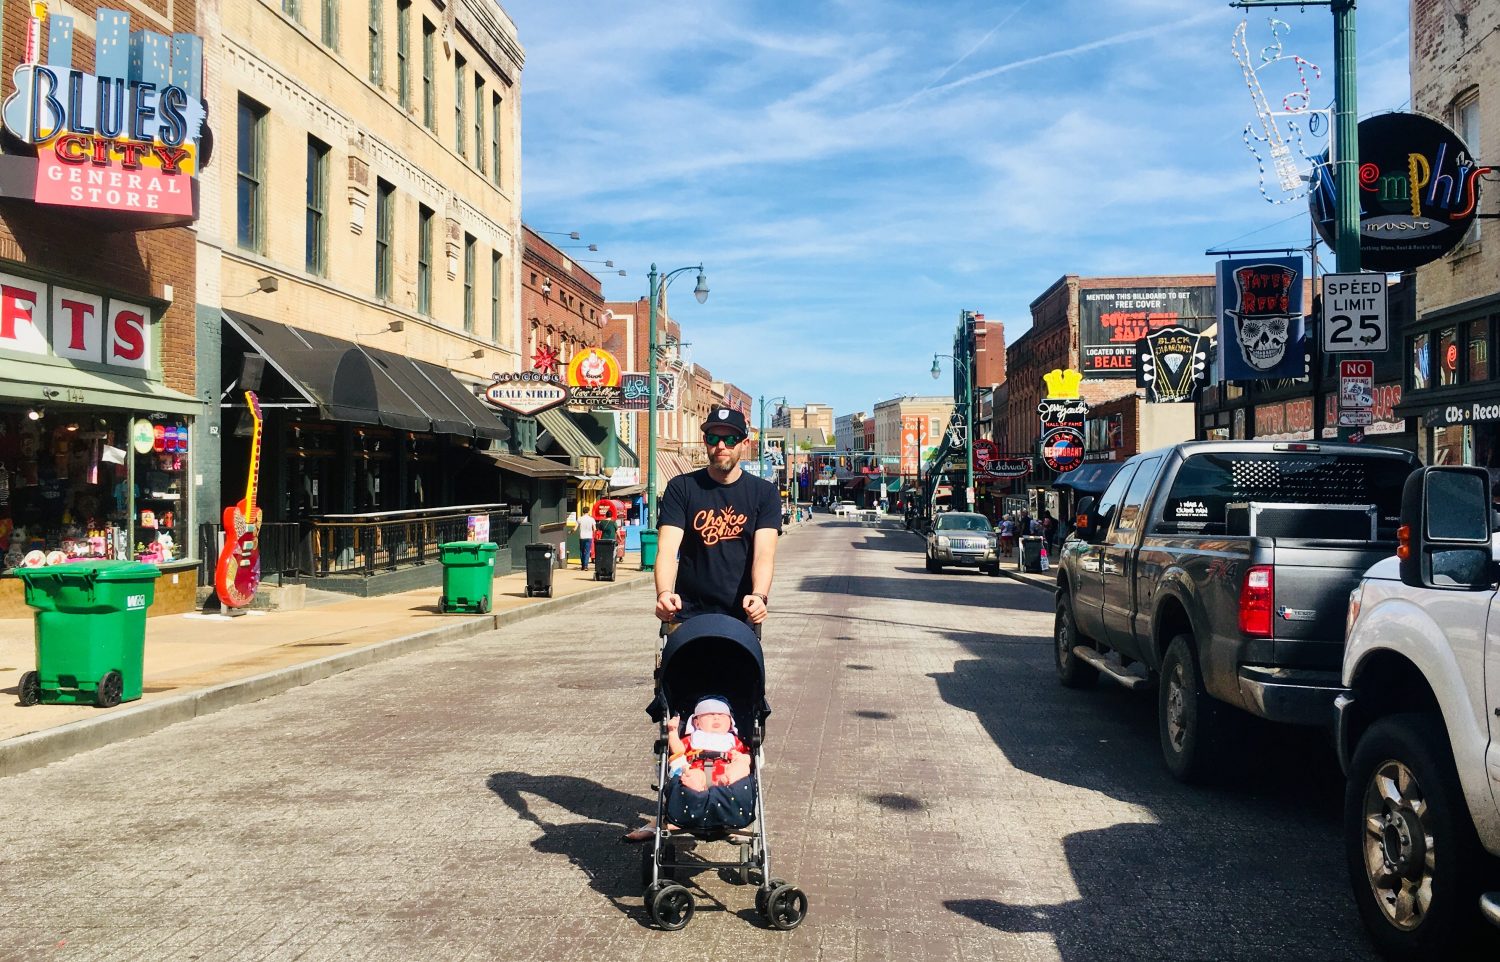 BEALE STREET, MEMPHIS WITH A BABY